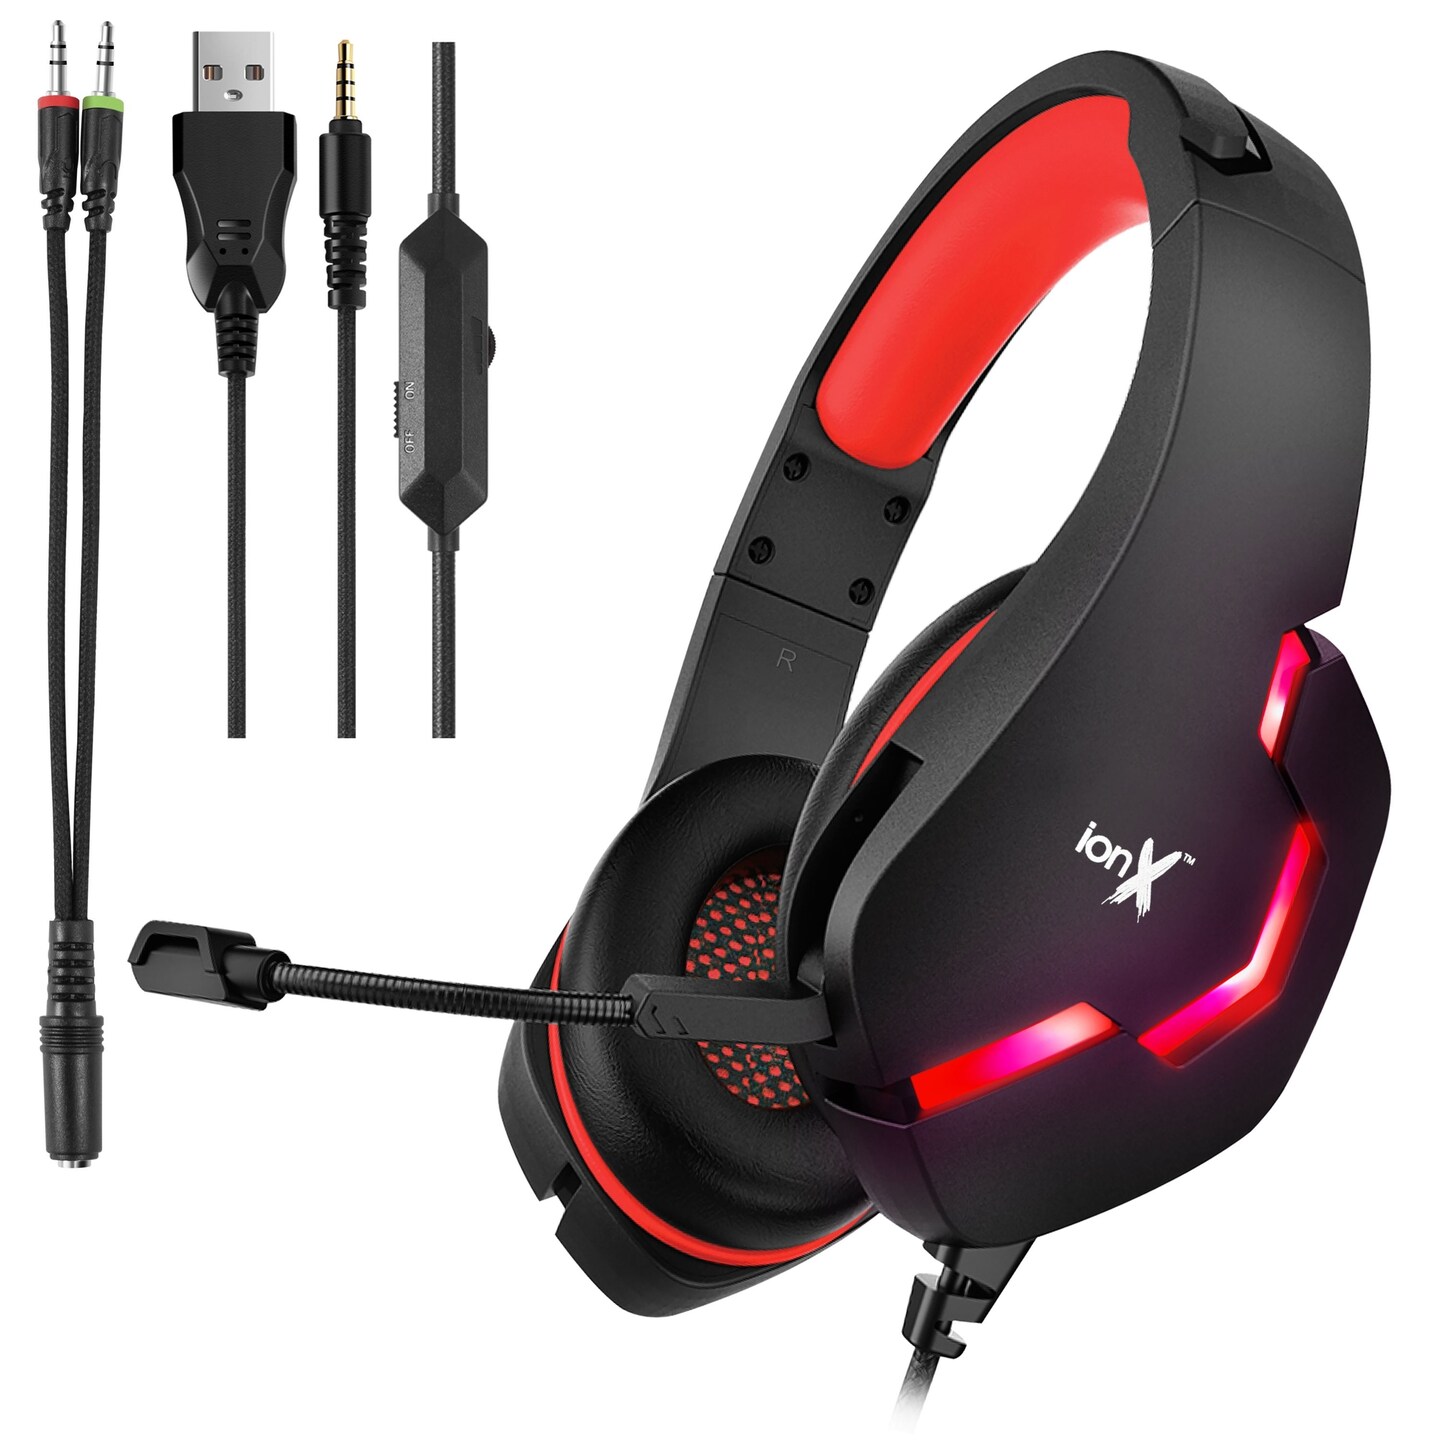 Wired Gaming Headset: For Xbox, Playstation, and PC